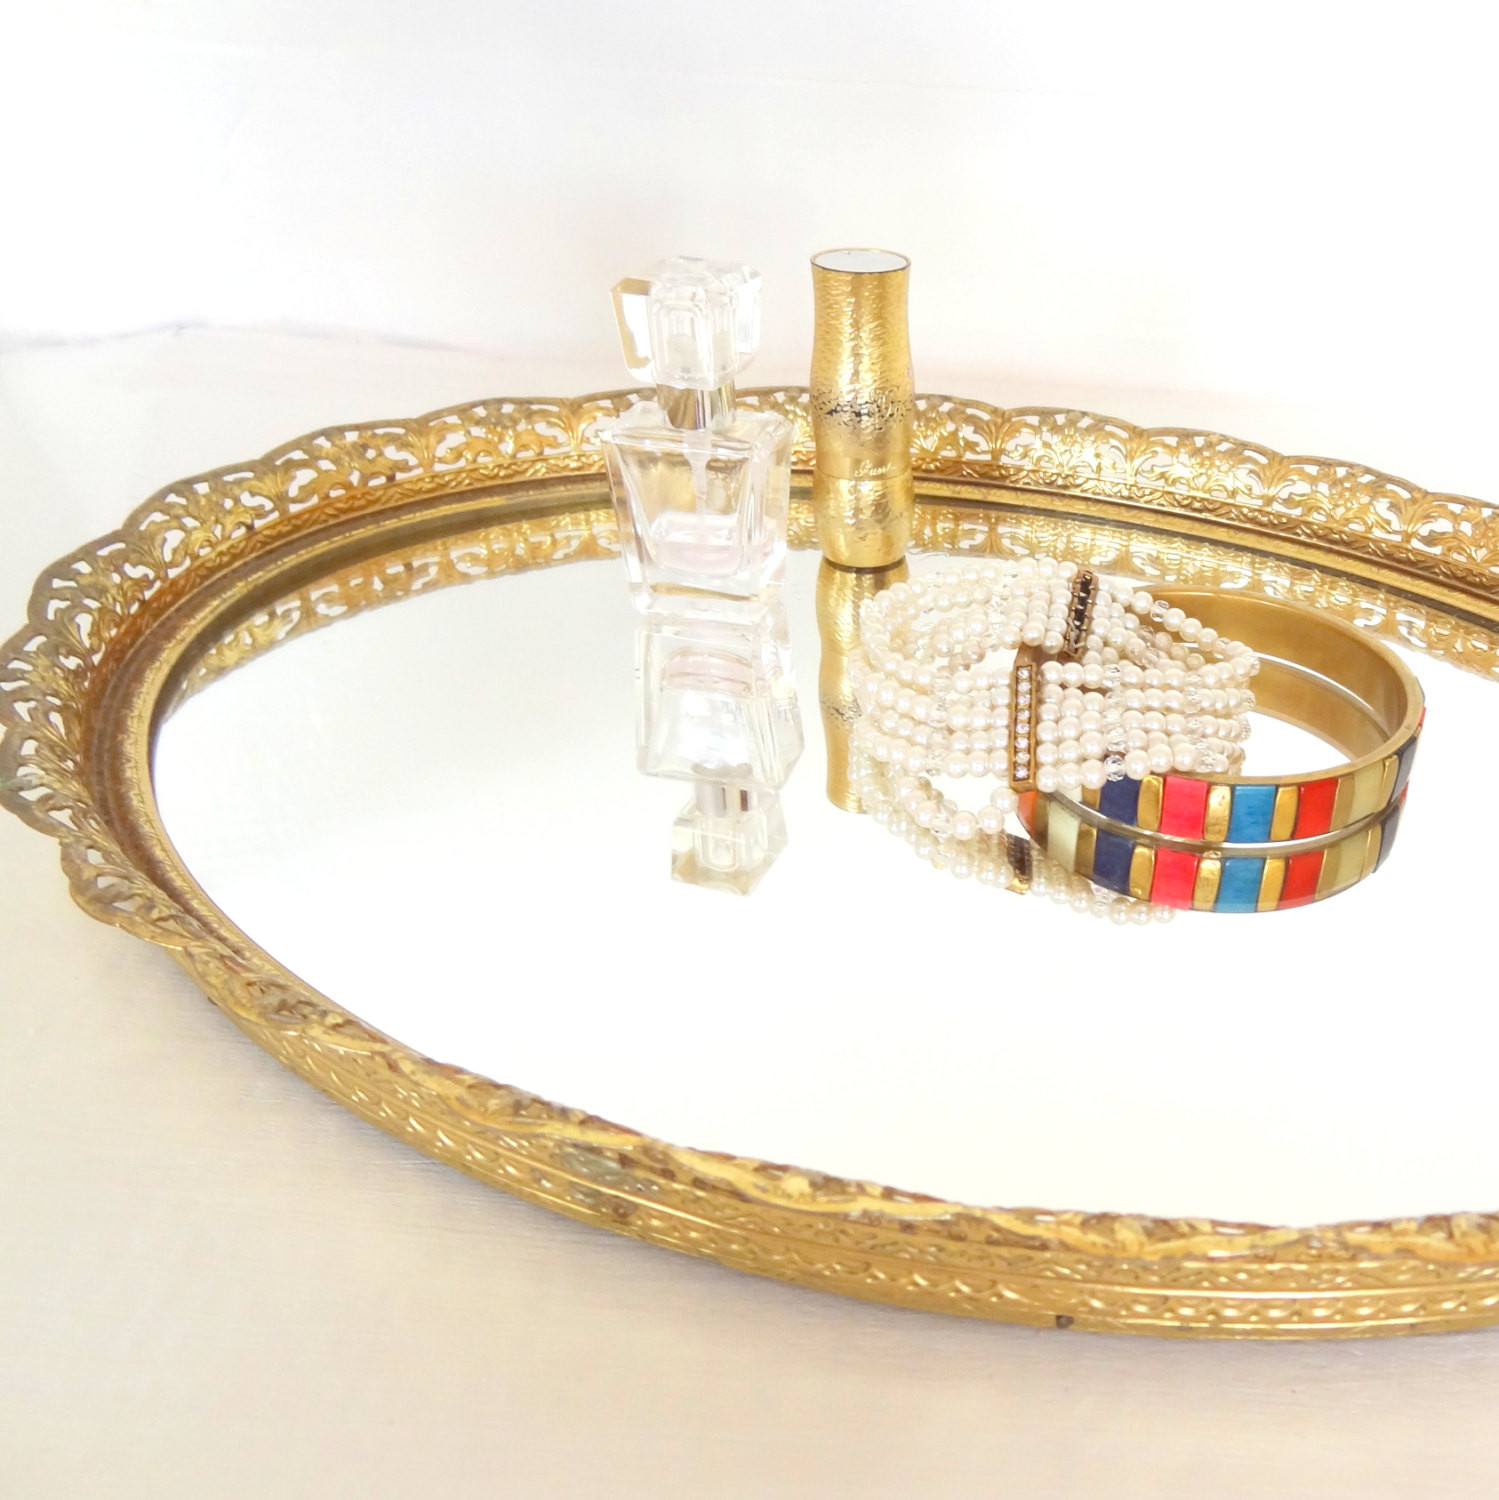 Mirrored Bathroom Tray
 Vintage Gold Mirrored Vanity Tray